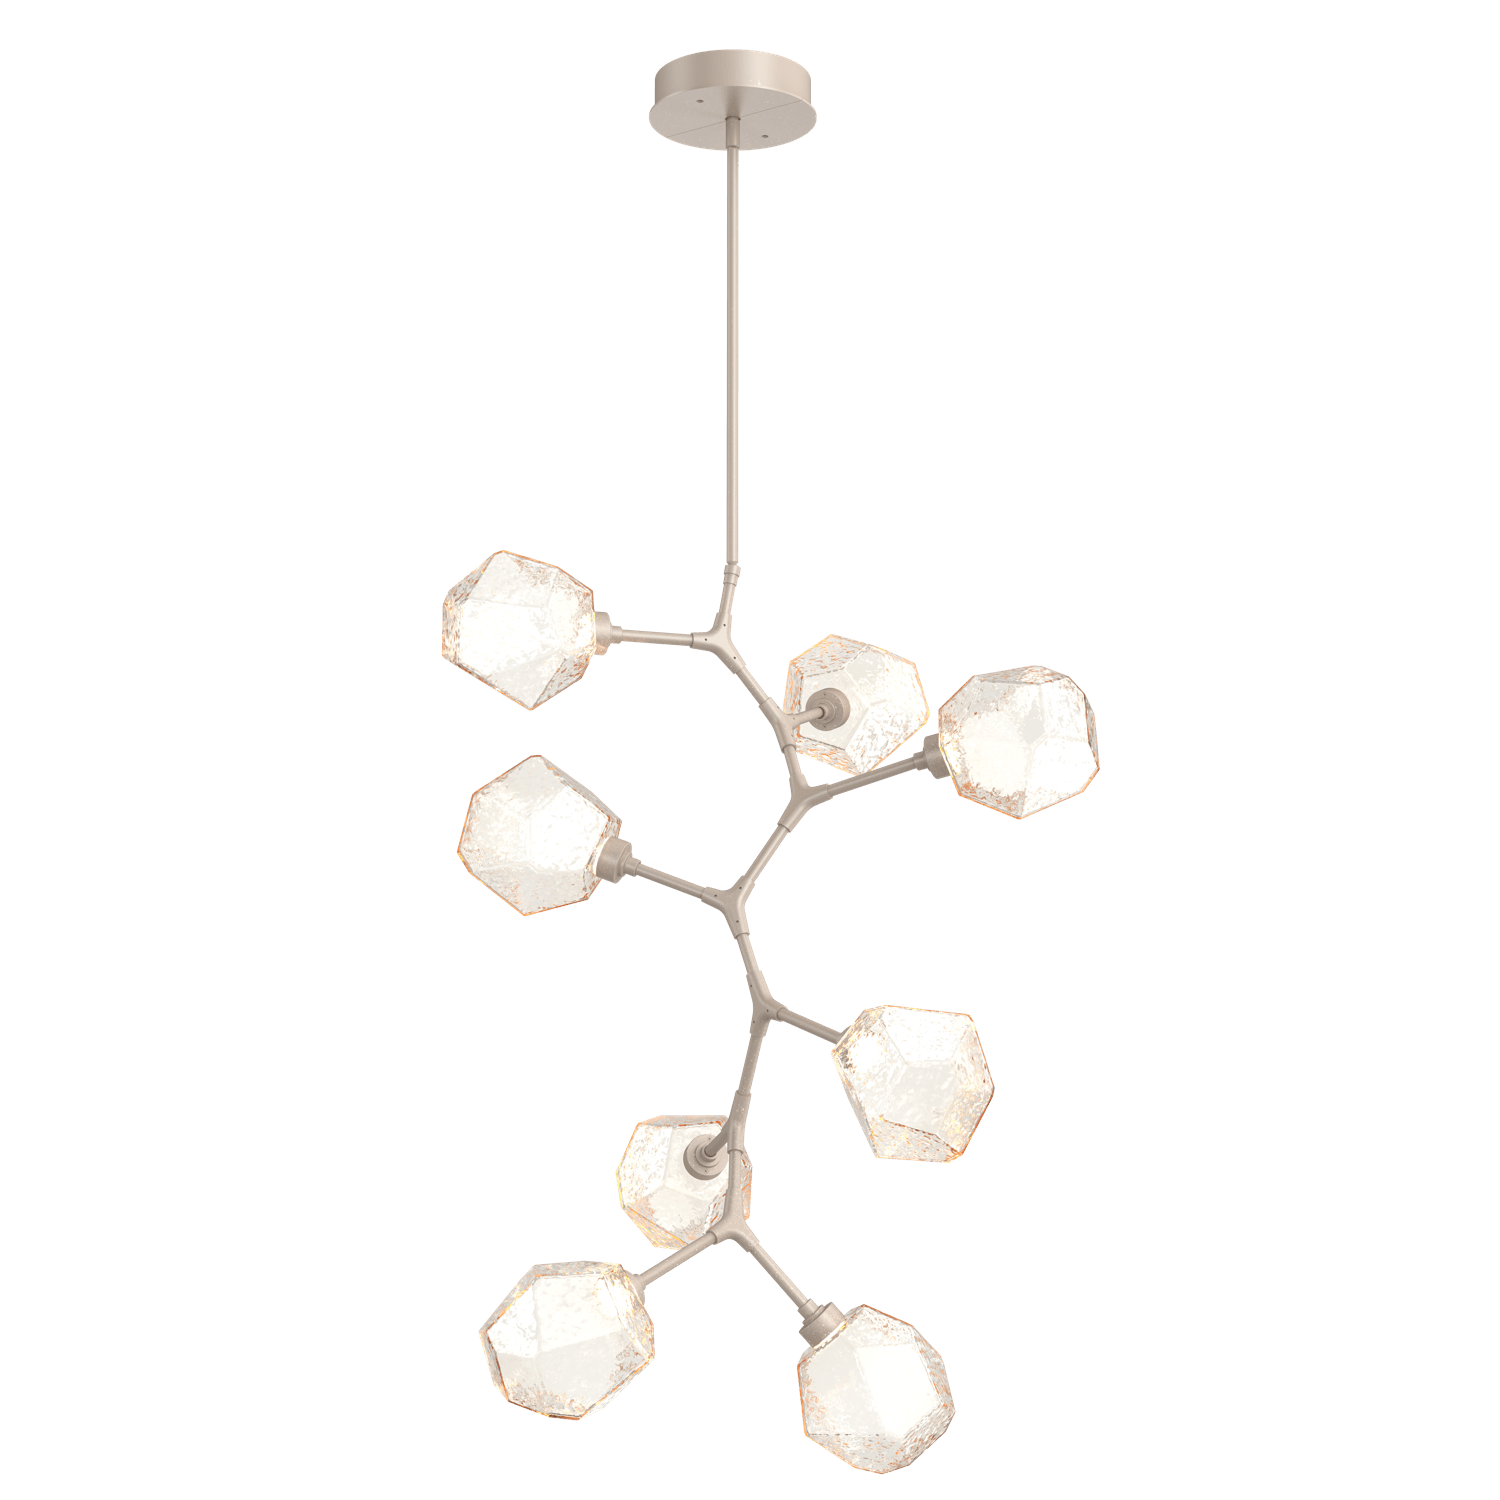 CHB0039-VB-BS-A-Hammerton-Studio-Gem-8-light-modern-vine-chandelier-with-metallic-beige-silver-finish-and-amber-blown-glass-shades-and-LED-lamping